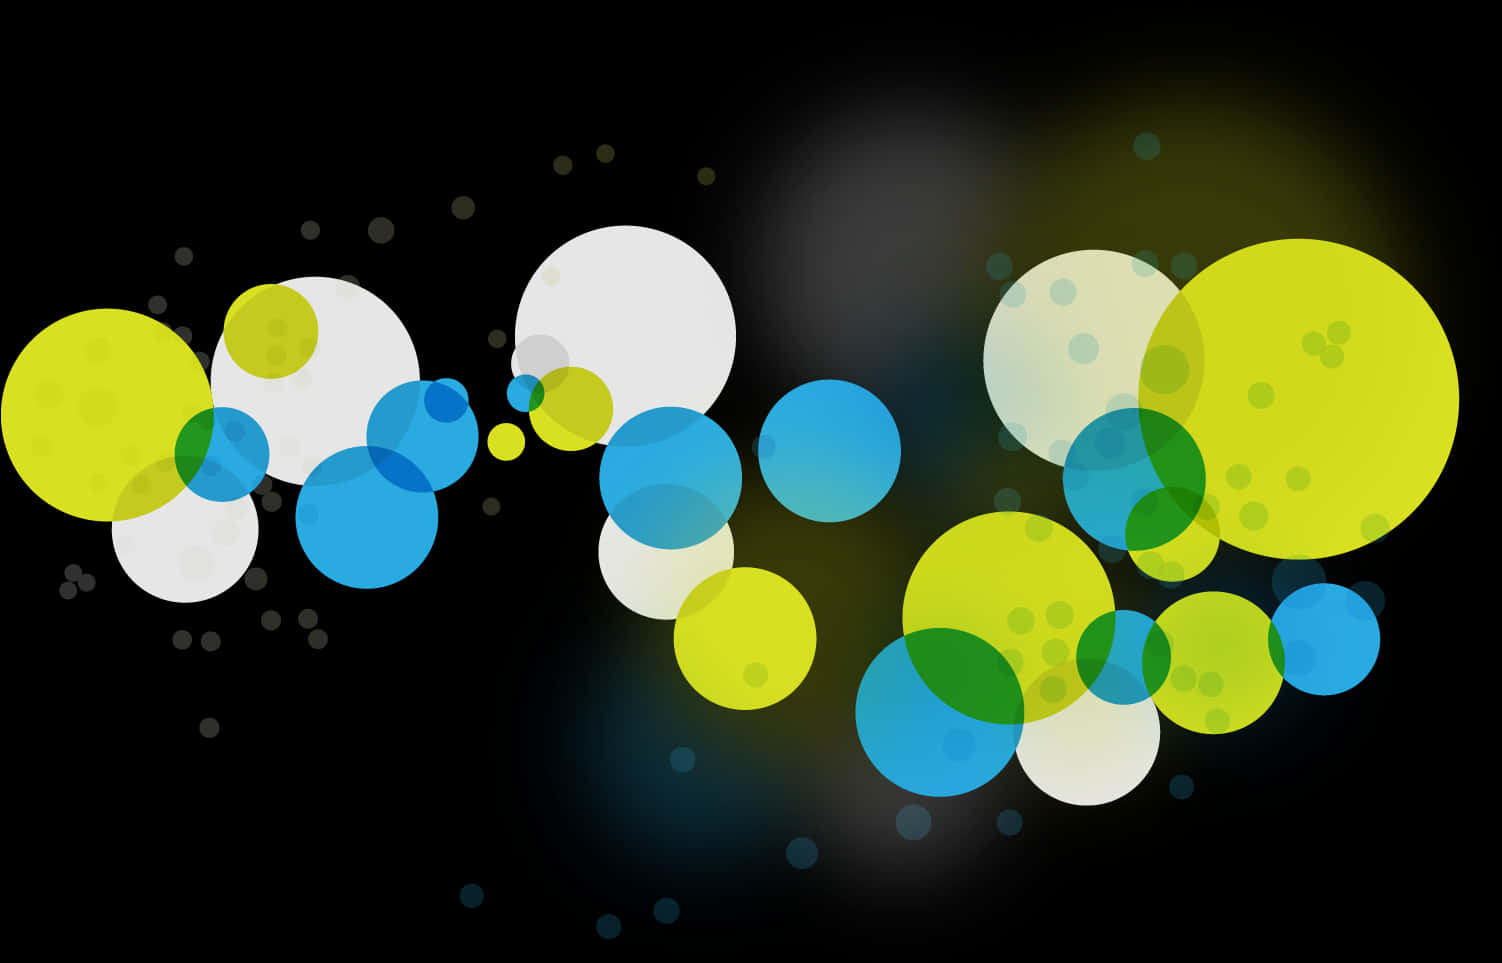 A Group Of Blue And Yellow Circles